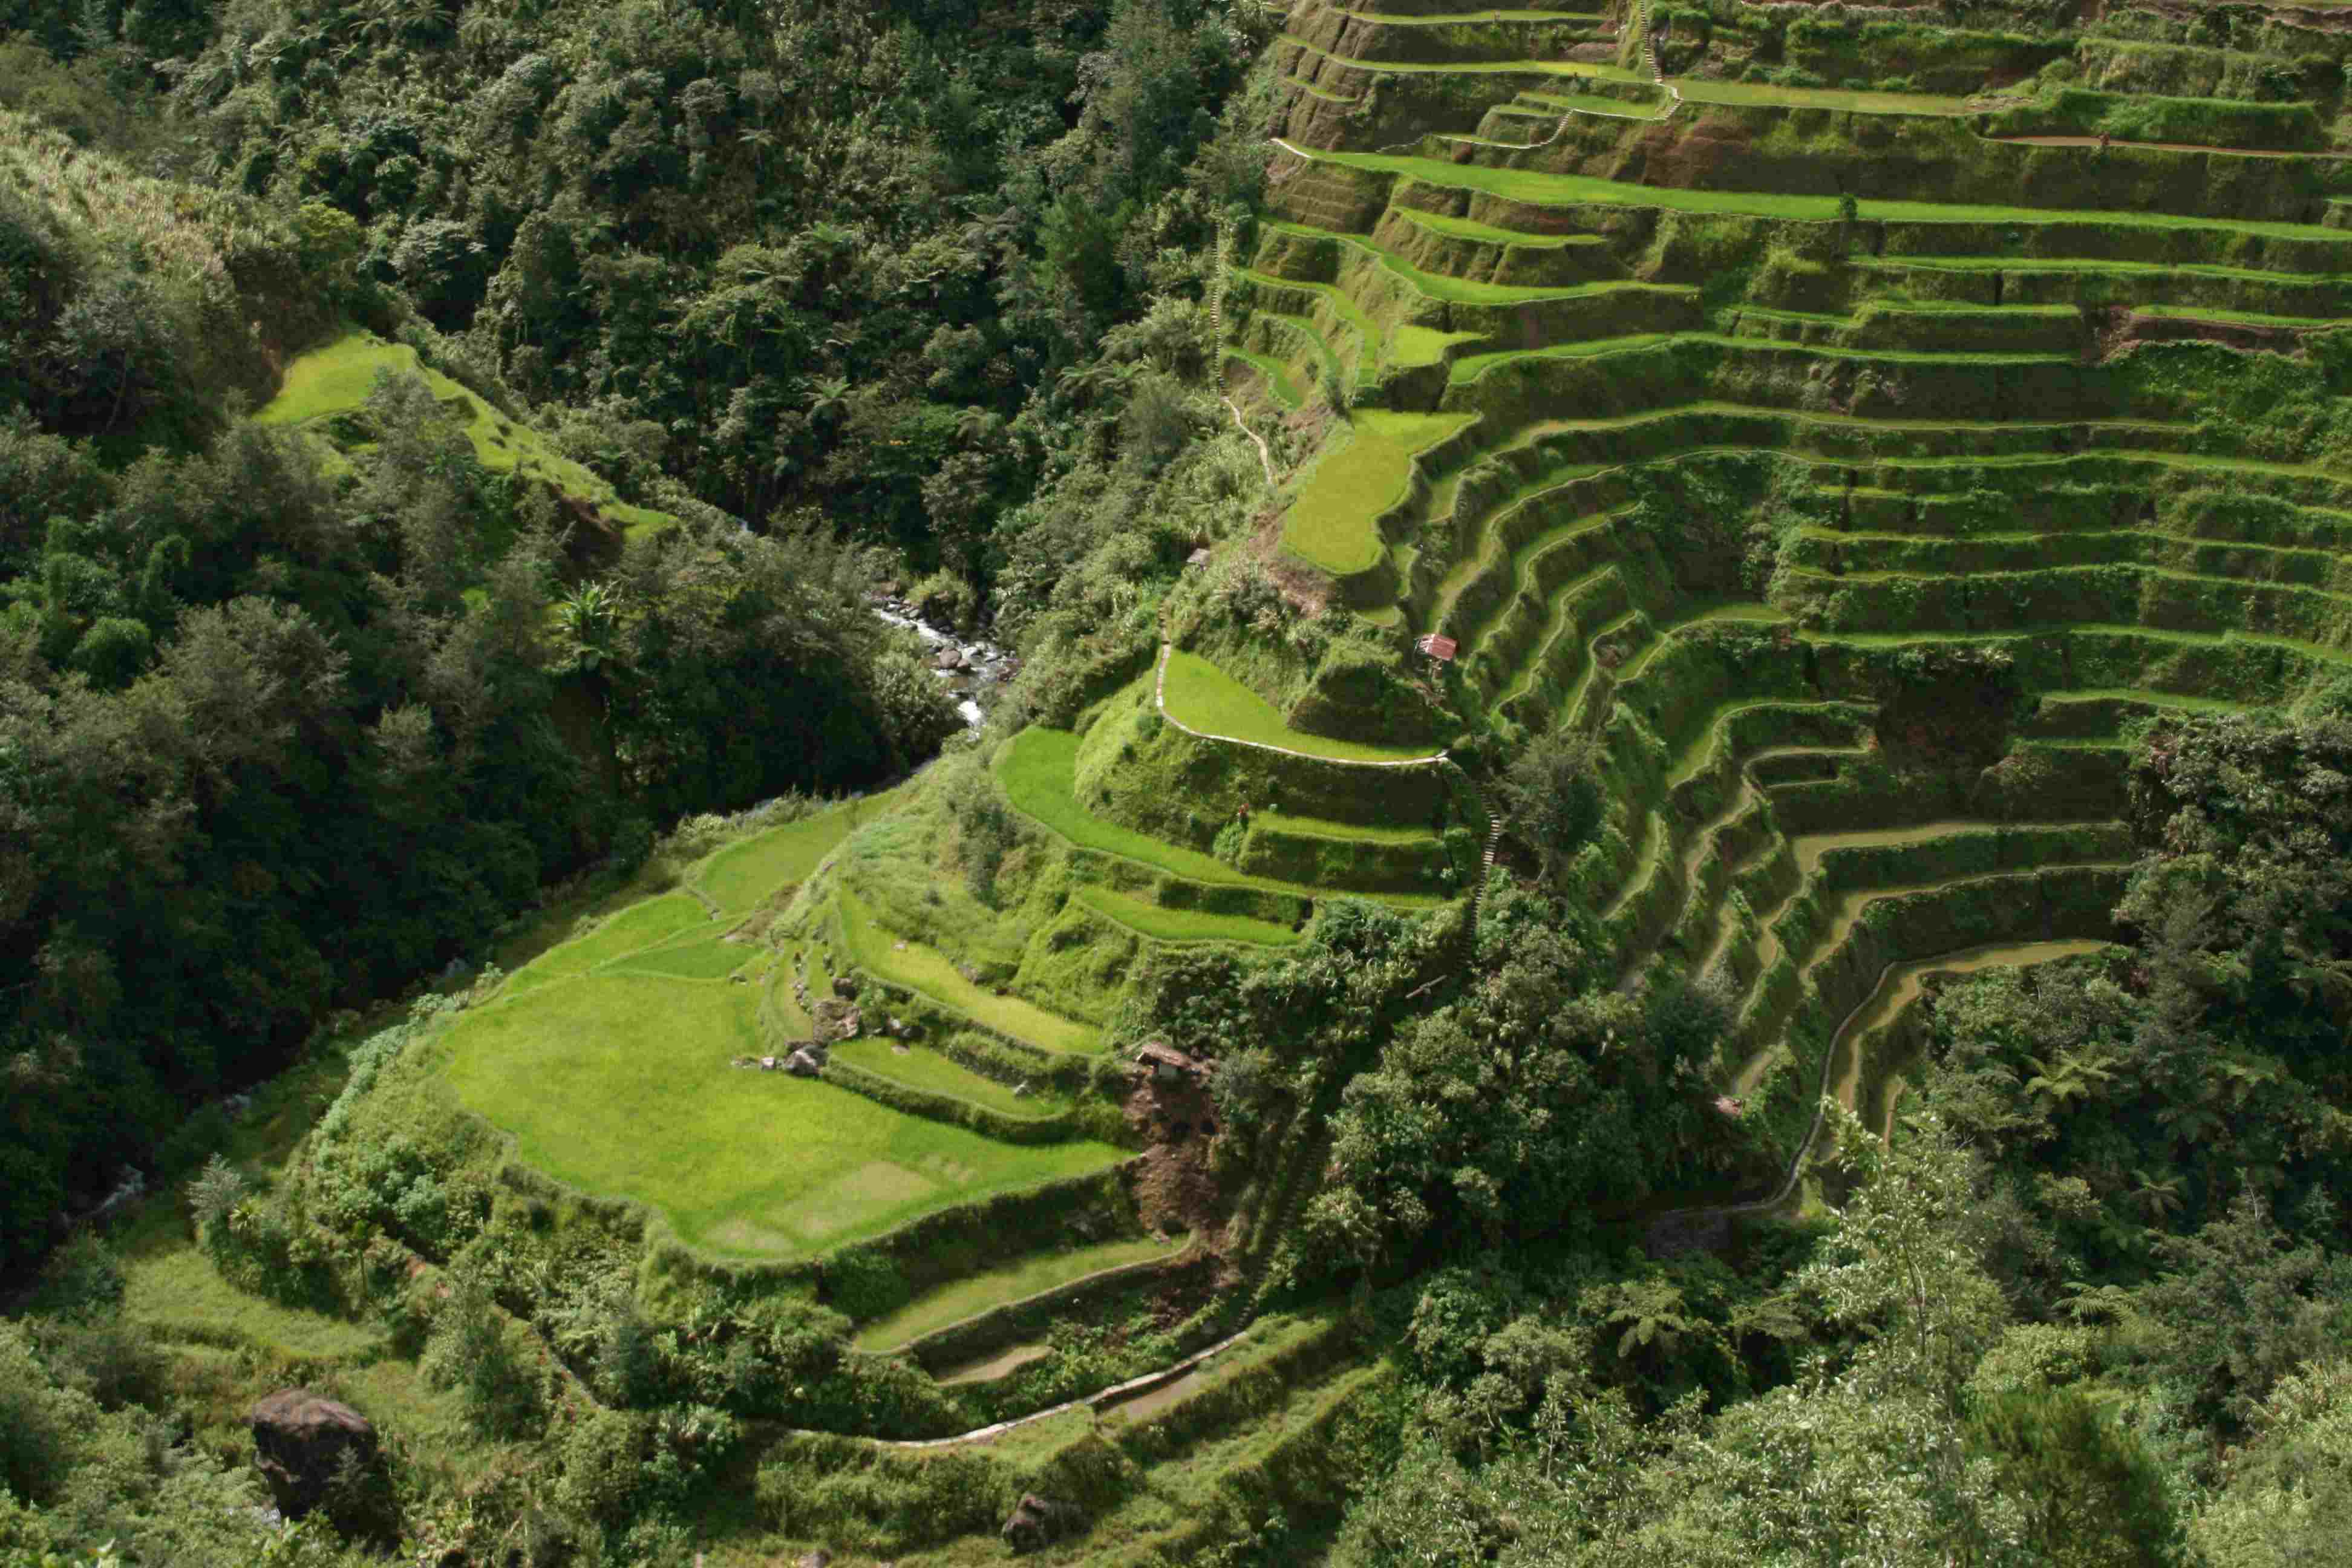 Closer view of the The Banaue Rice Terraces - Surreal places to visit